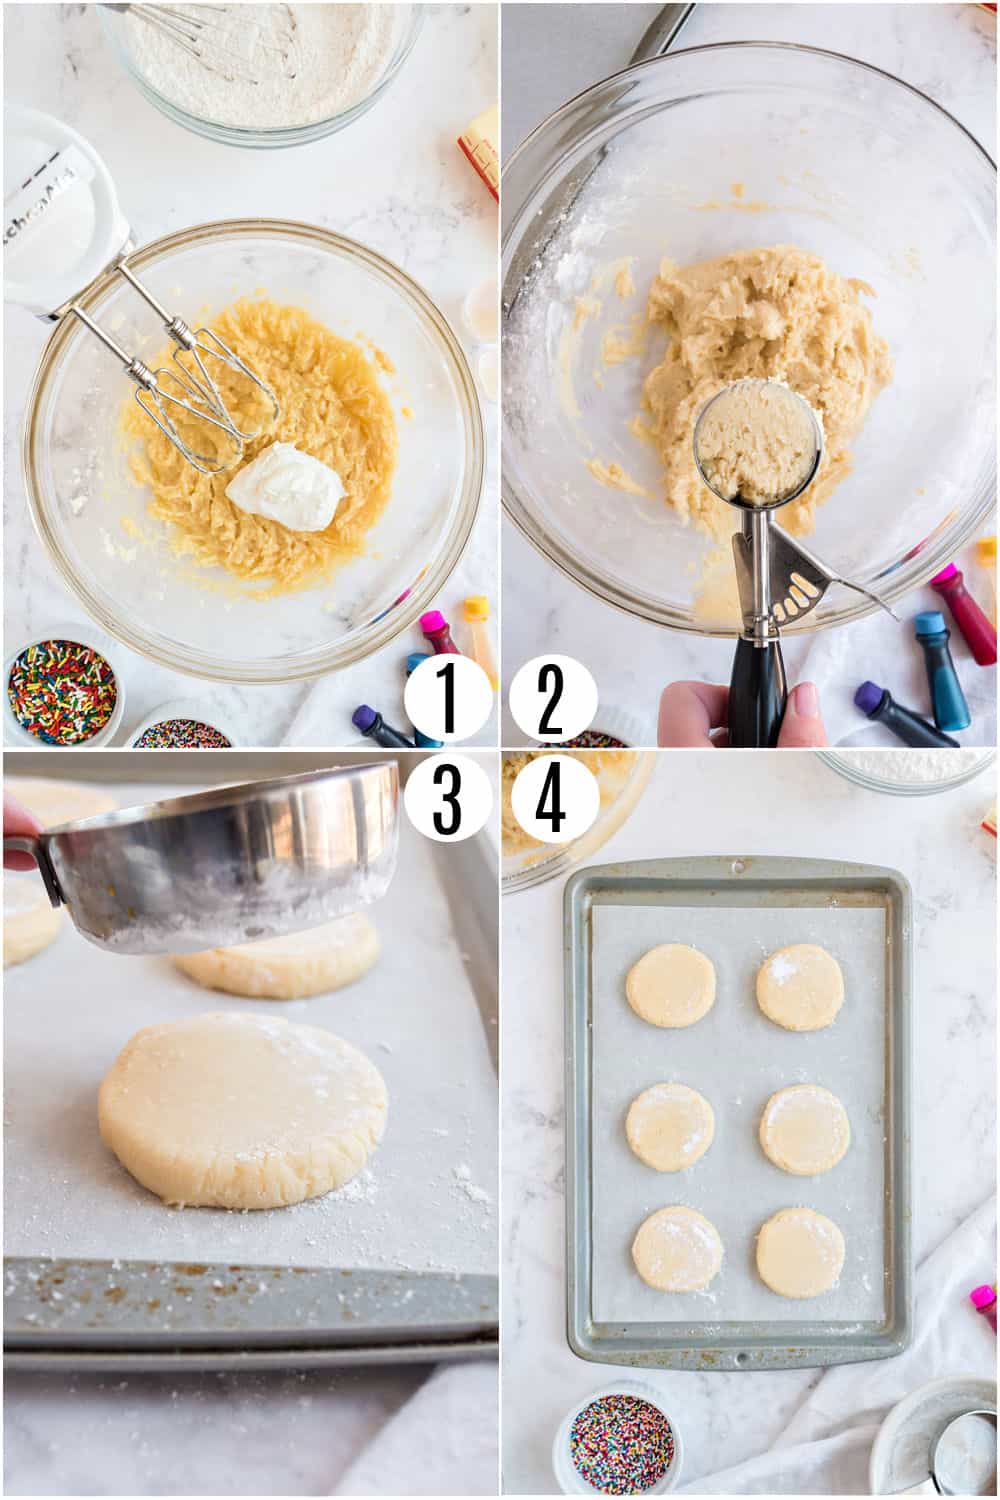 Step by step photos showing how to make lofthouse cookies.